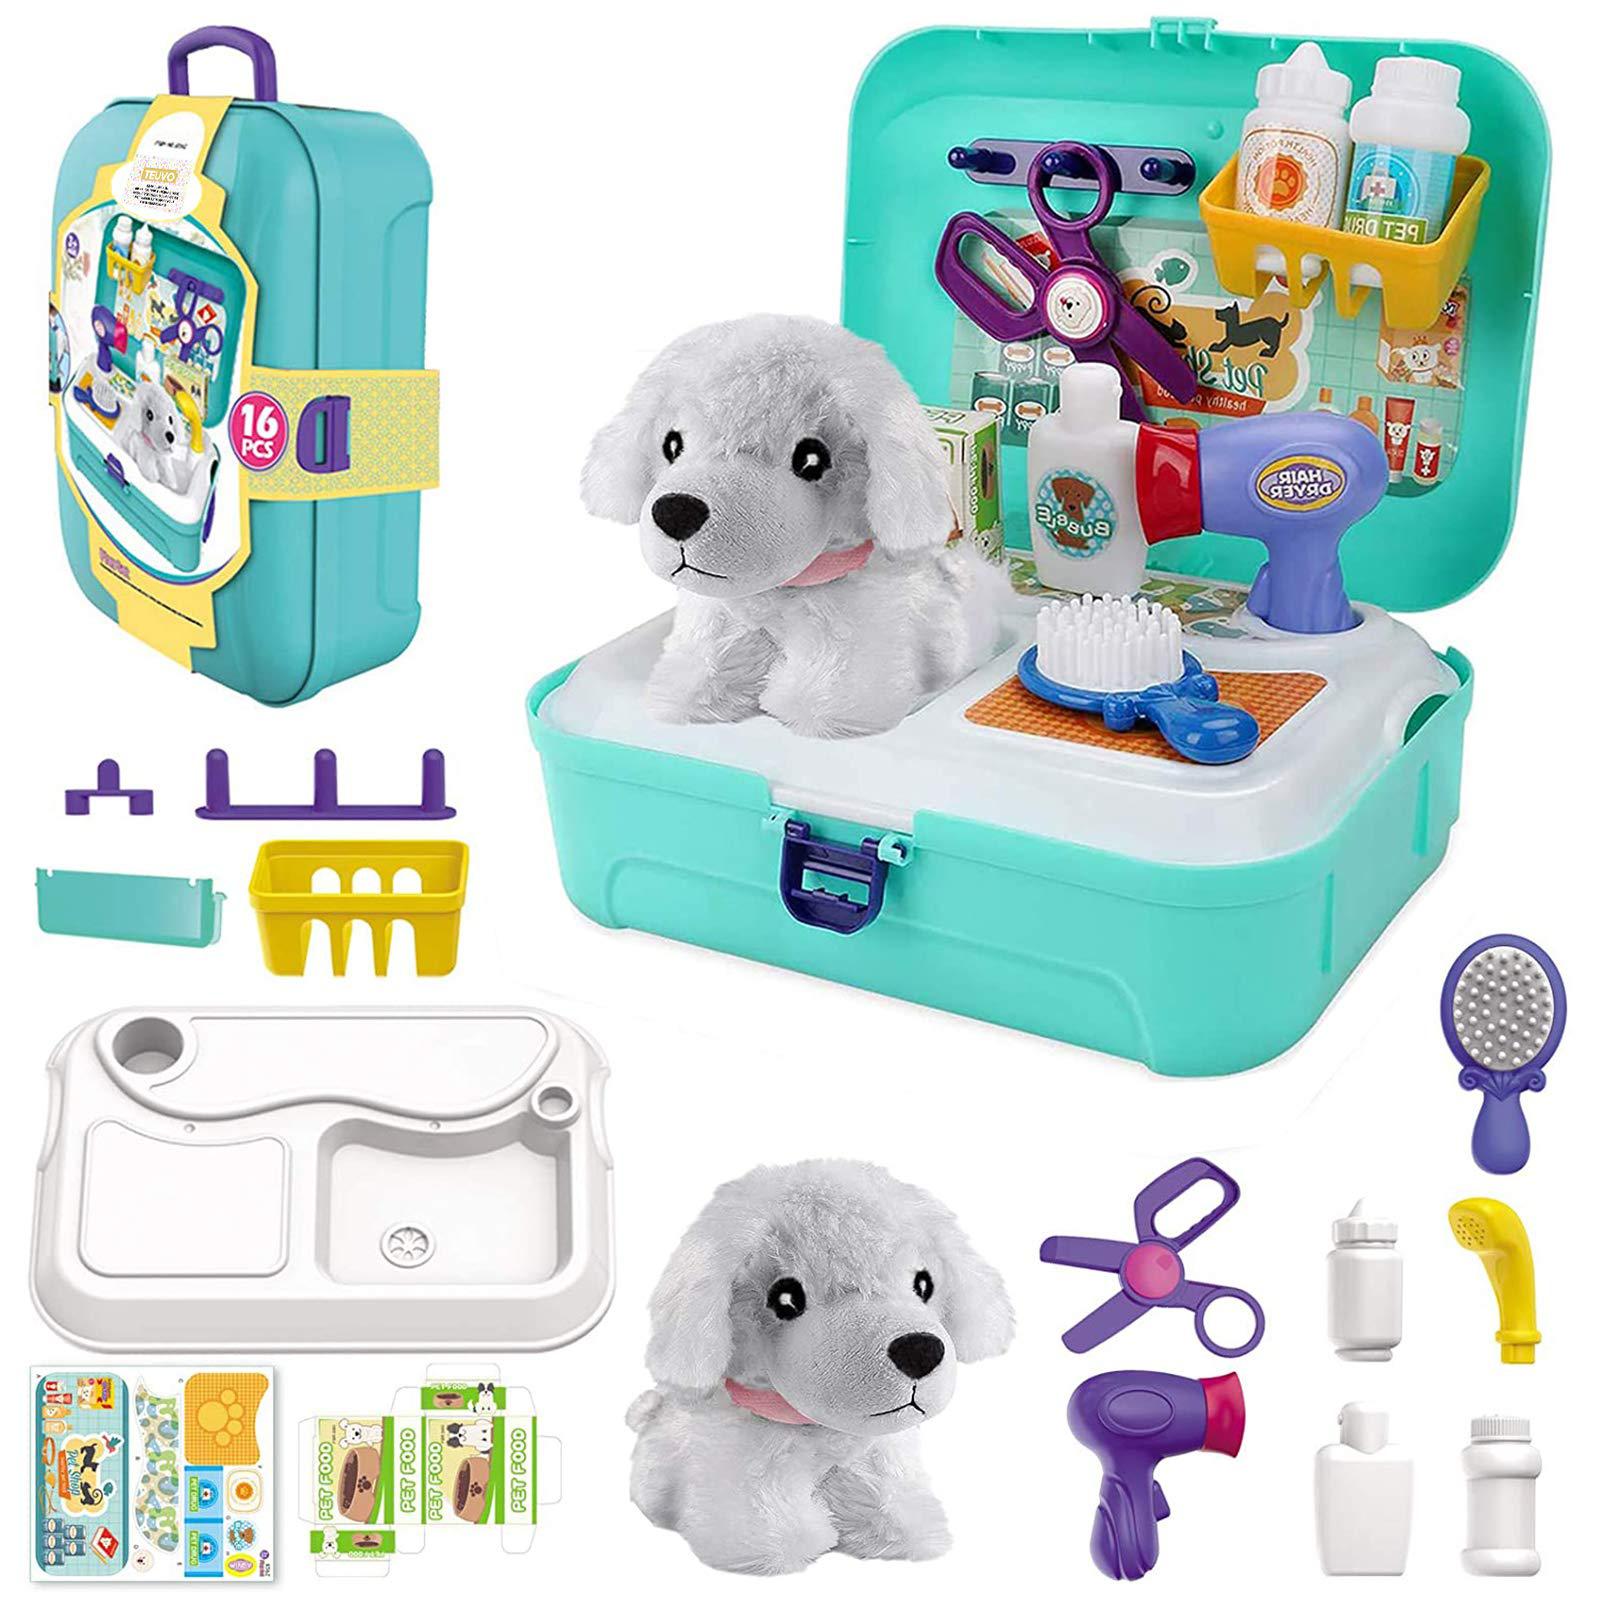 teuvo pet care play set doctor kit for kids, 16 pcs doctor pretend play vet dog grooming toys puppy dog carrier feeding dog b